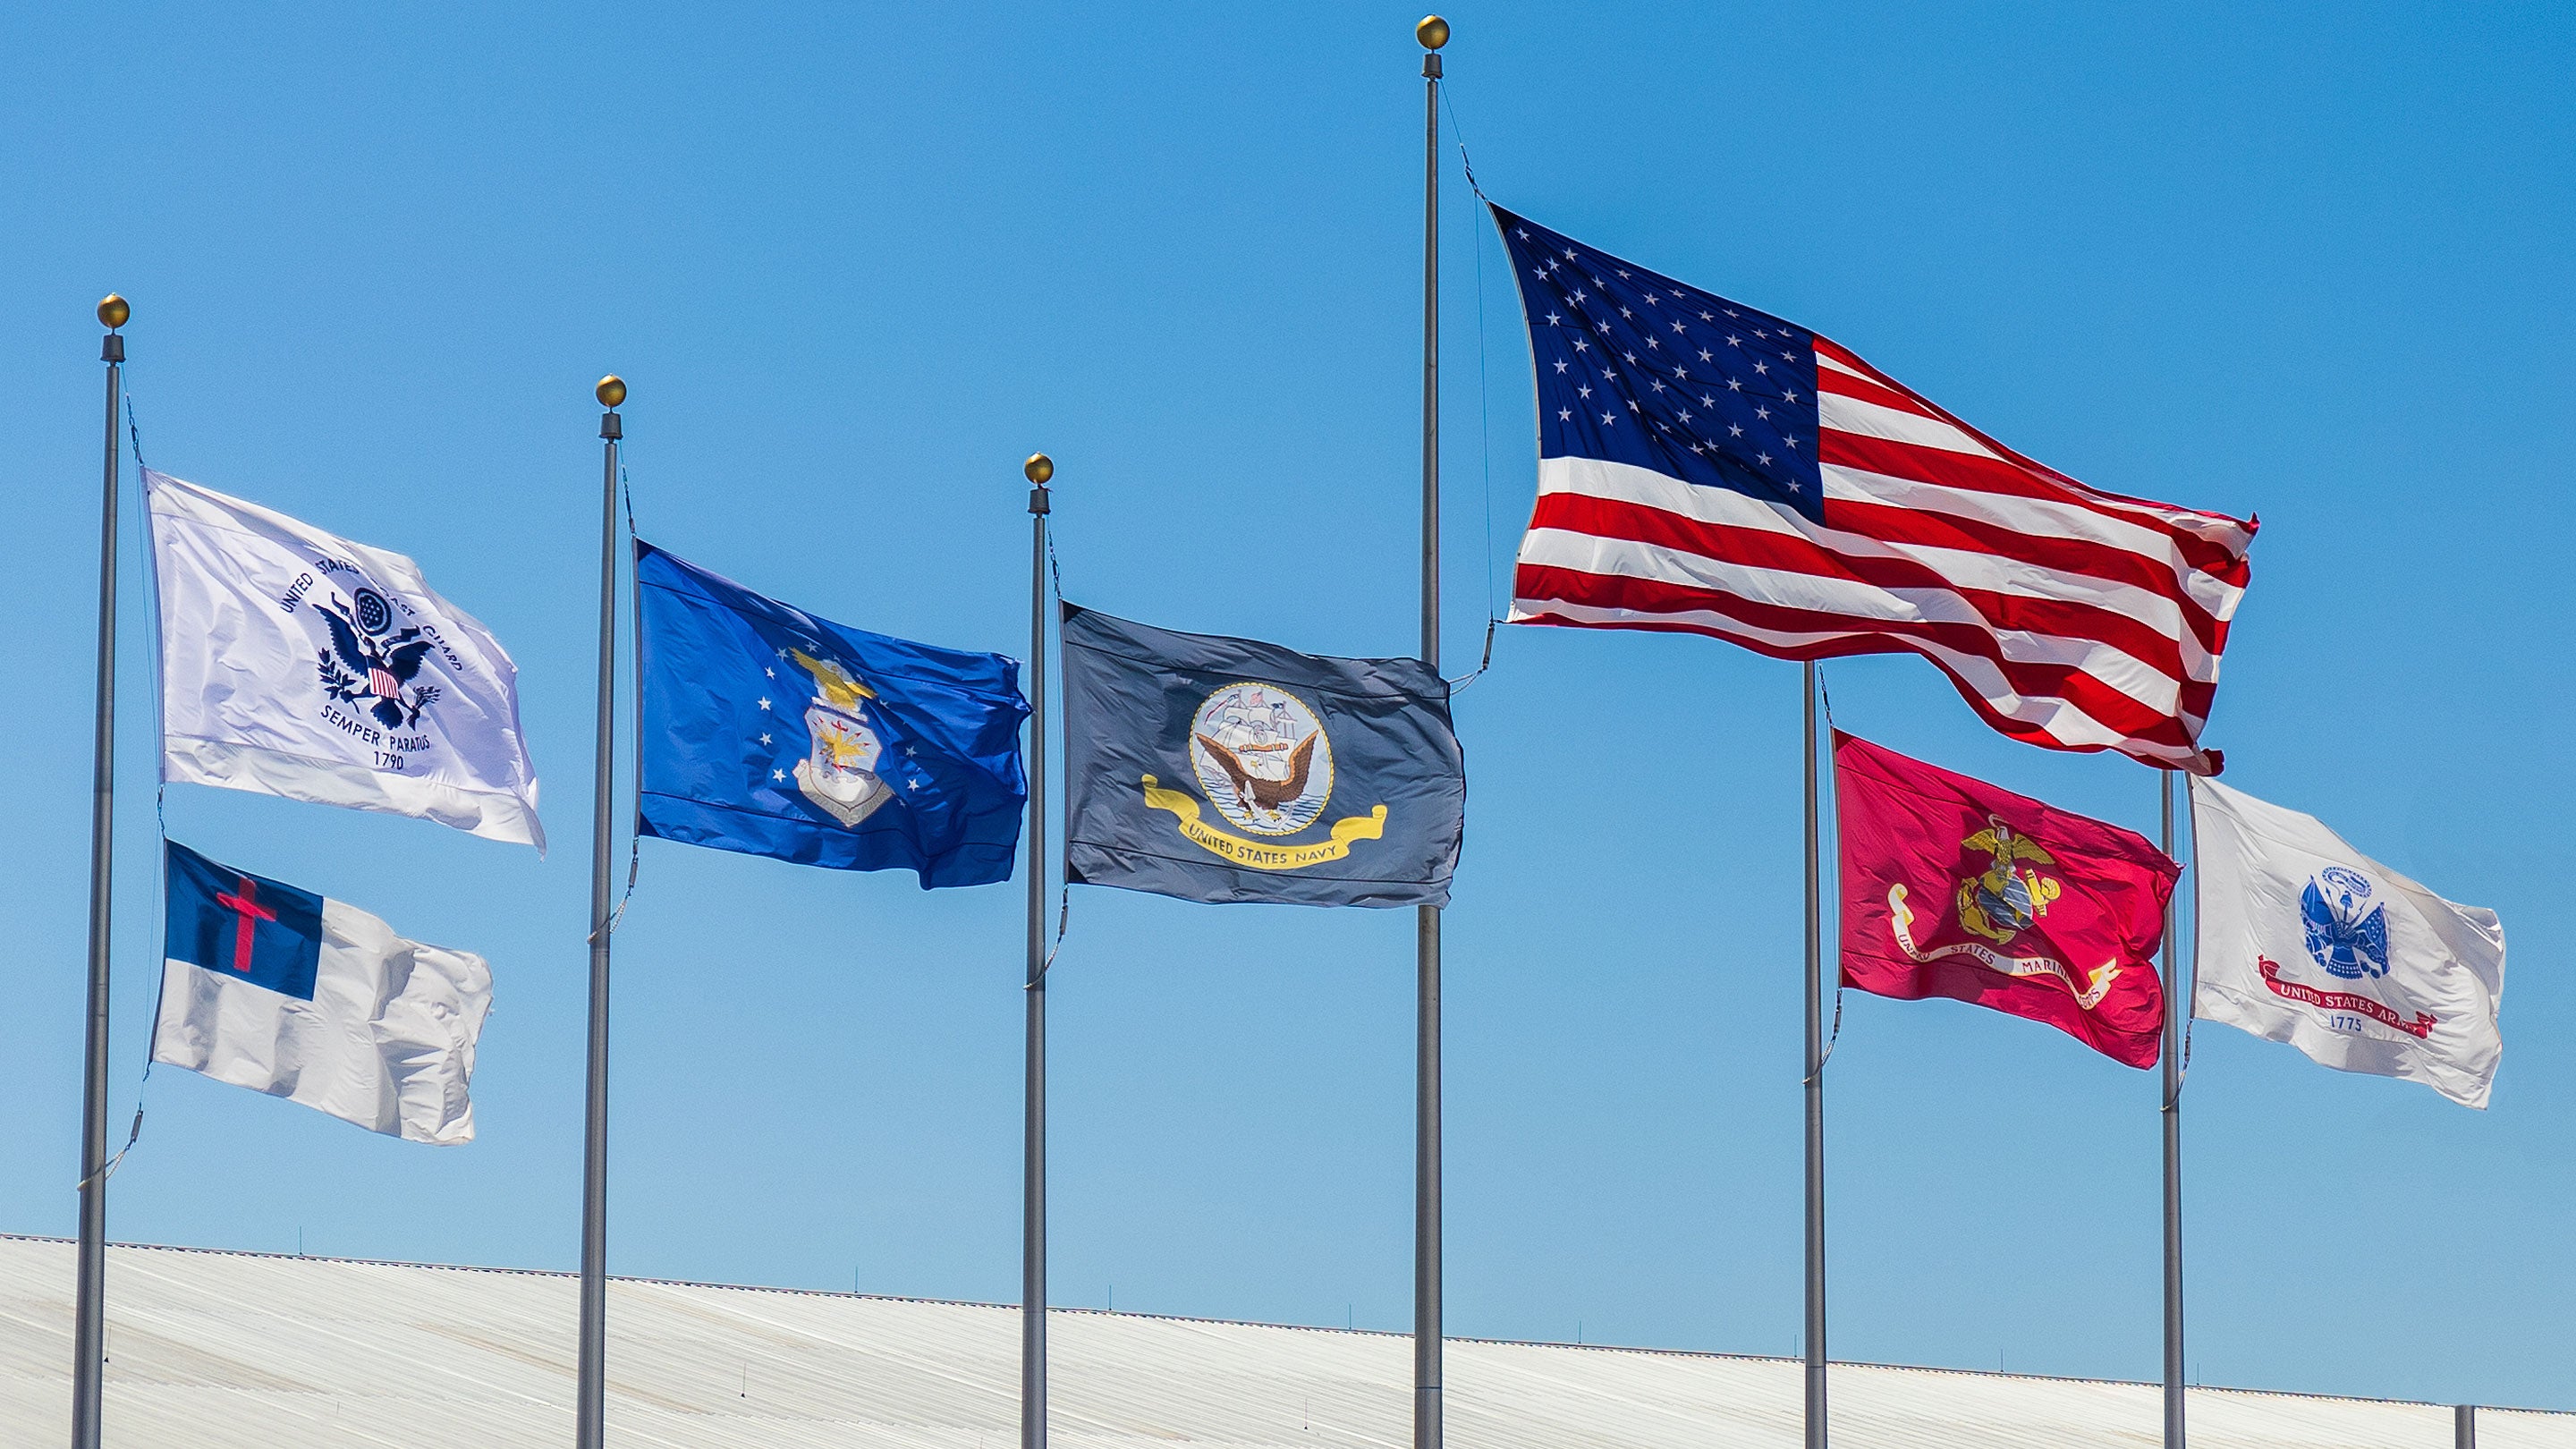 us armed forces flags